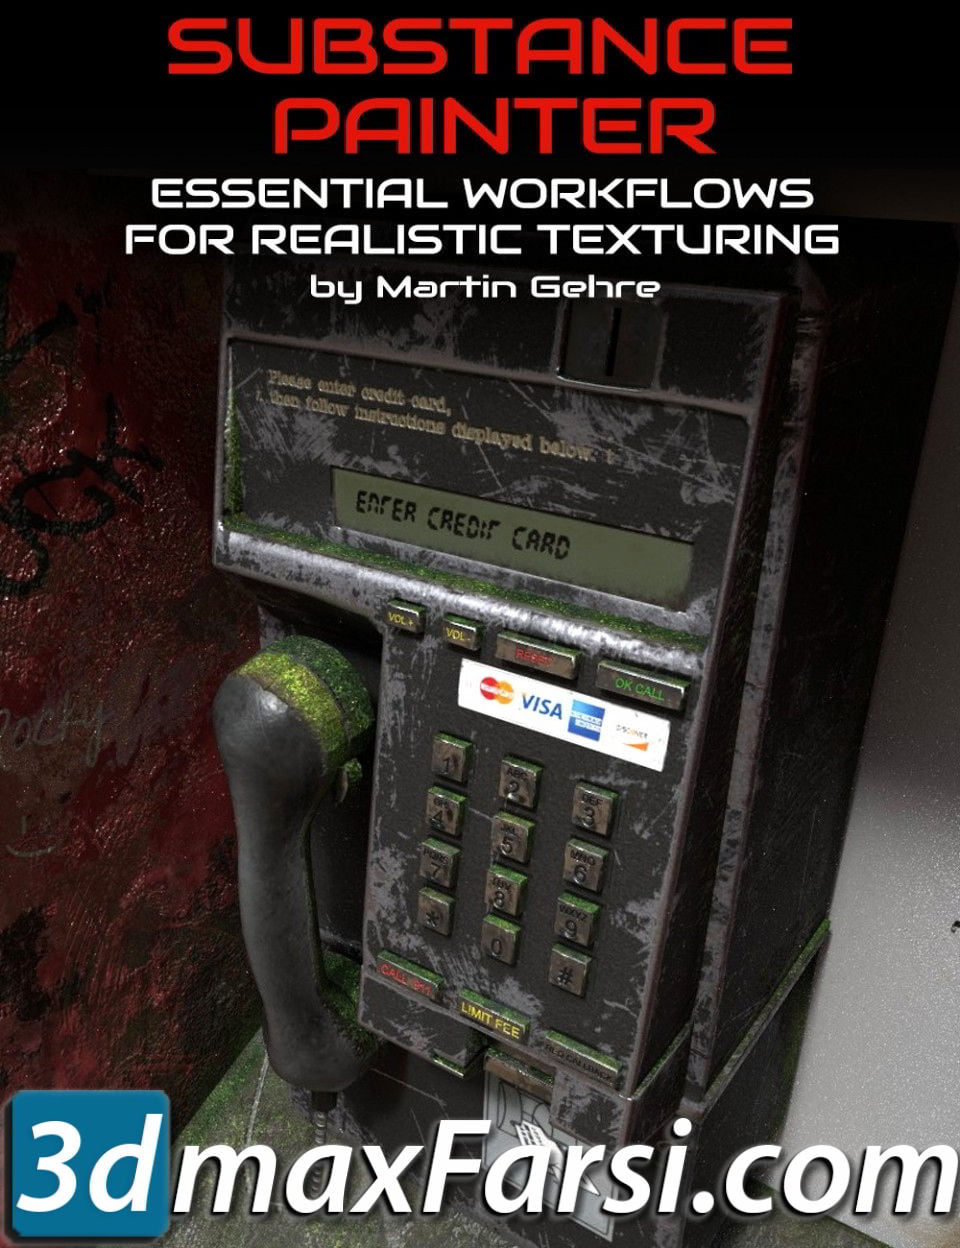 Daz3d, Detailing with Decals - Essential Workflows for Realistic Texturing free download